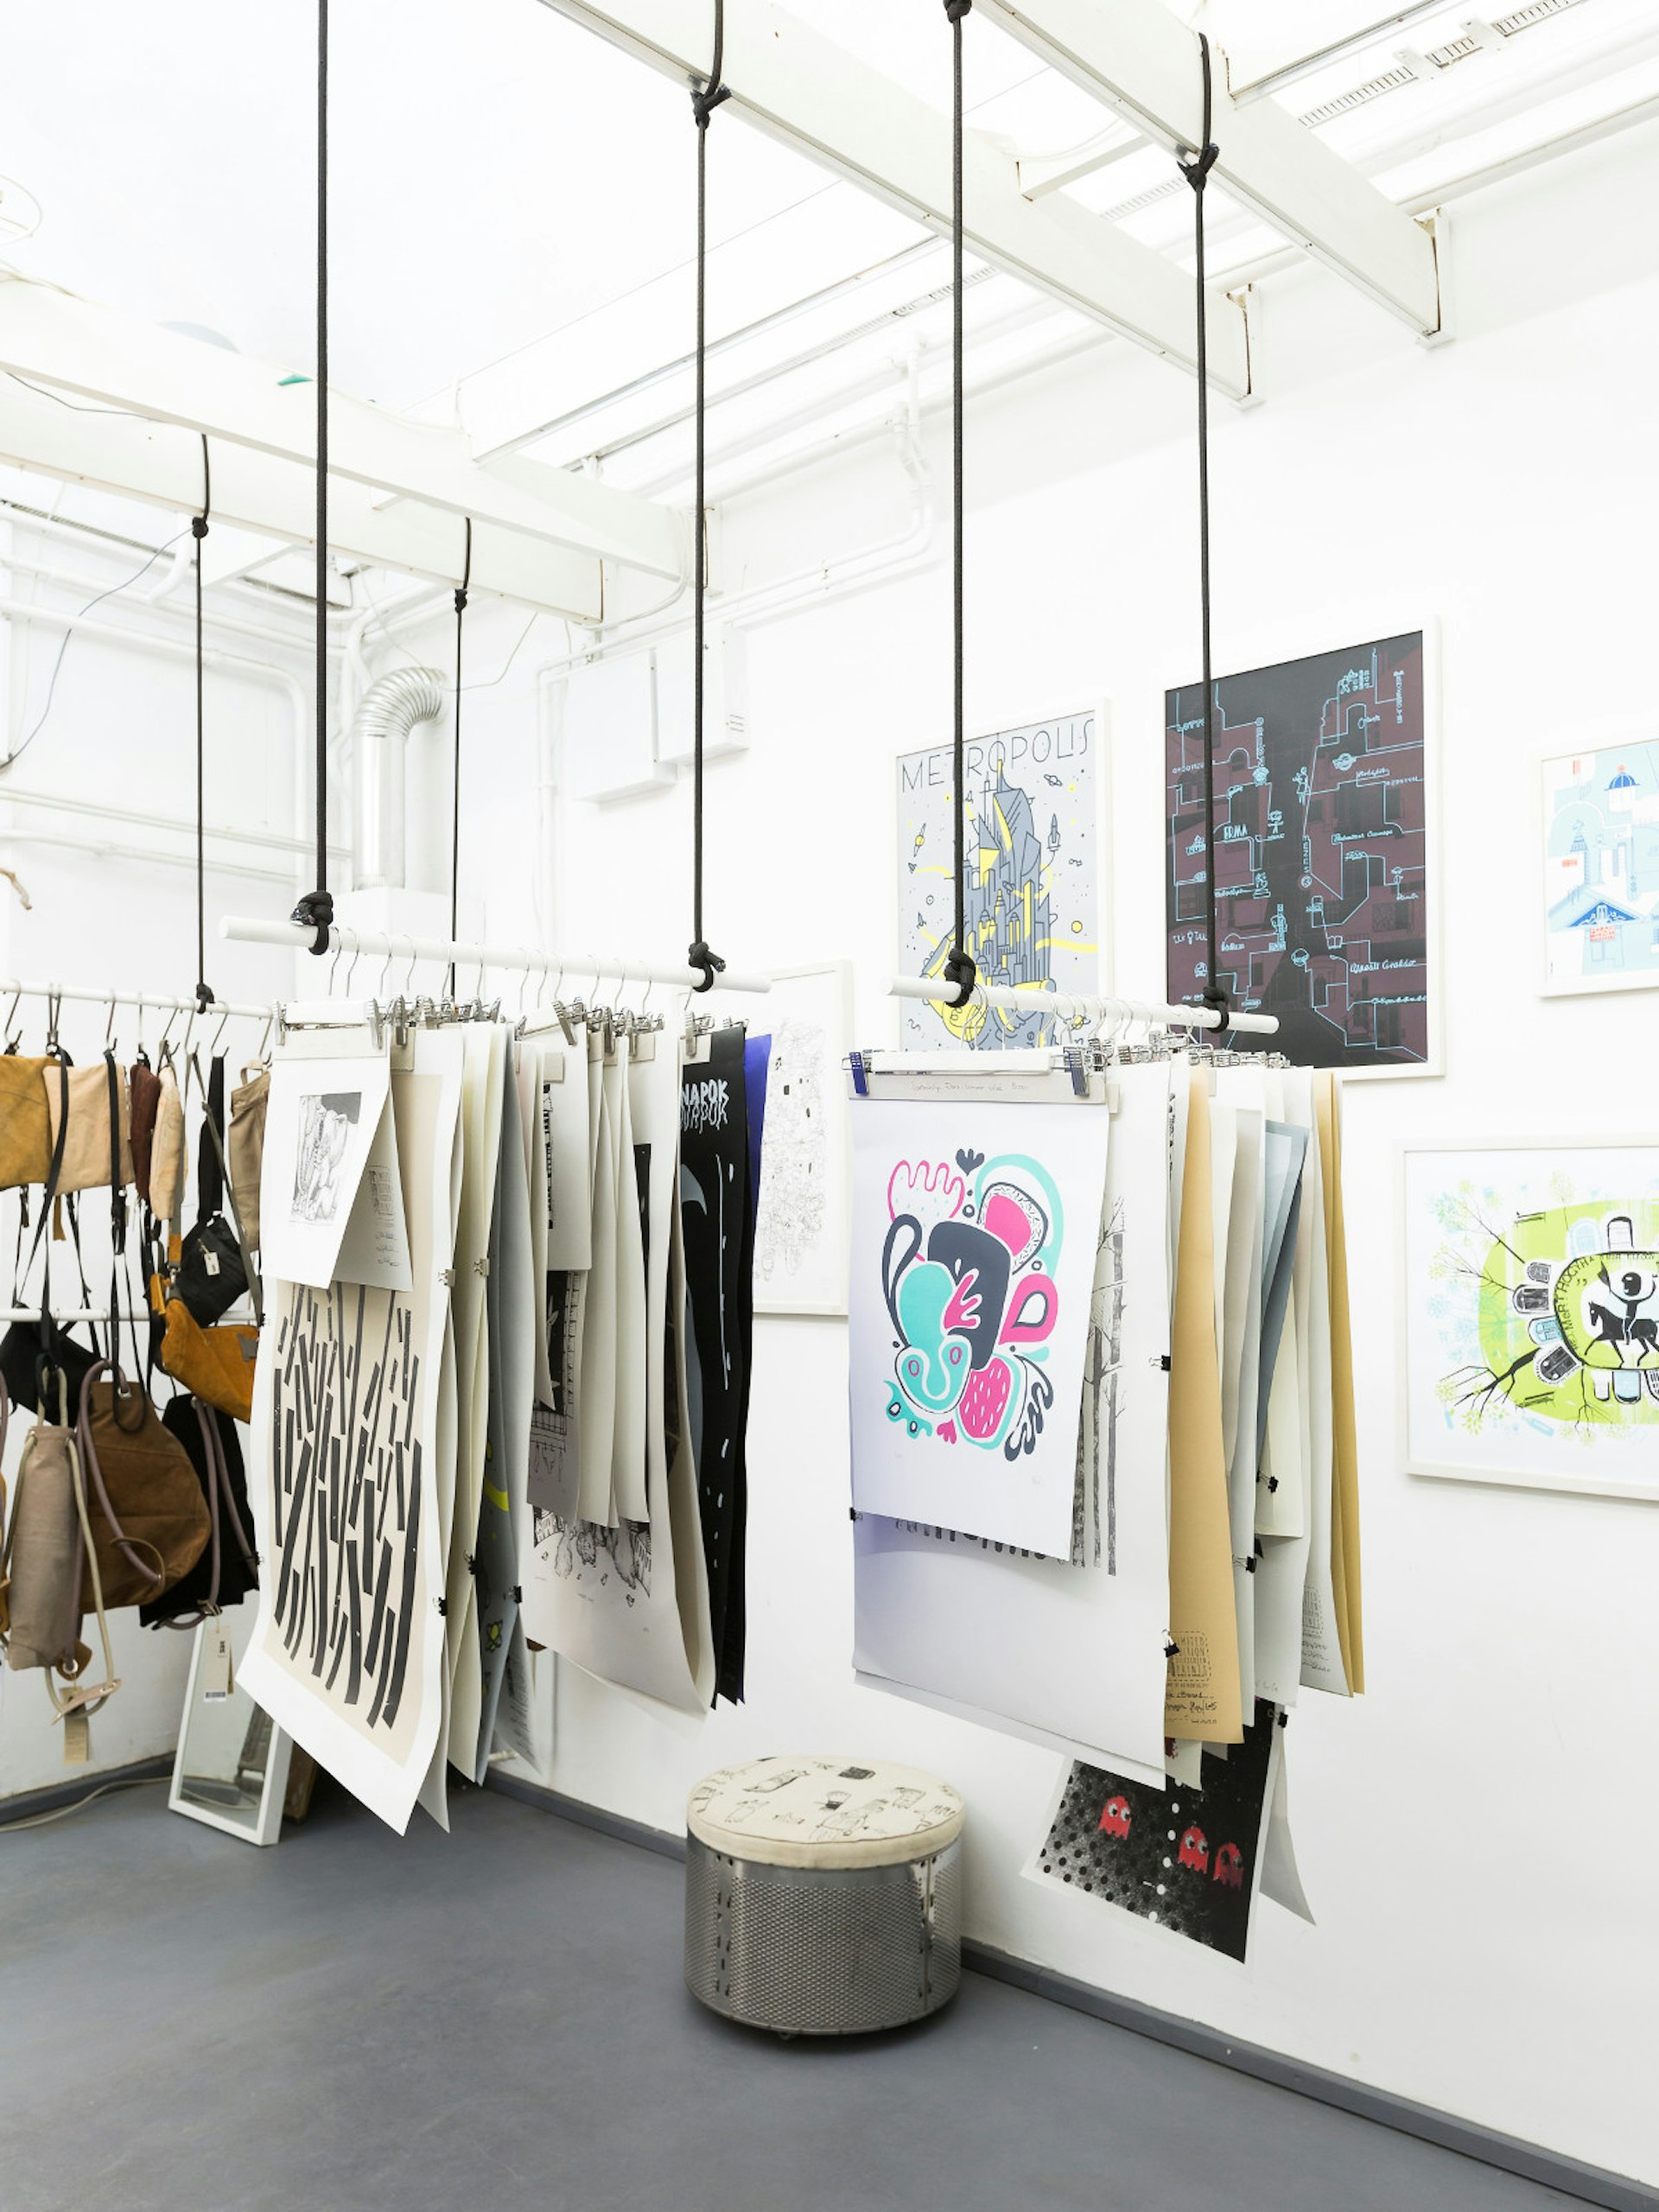 The hip Printa silkscreen studio, design shop and gallery focuses on local Budapest talent © Sarah Coghill / Lonely Planet